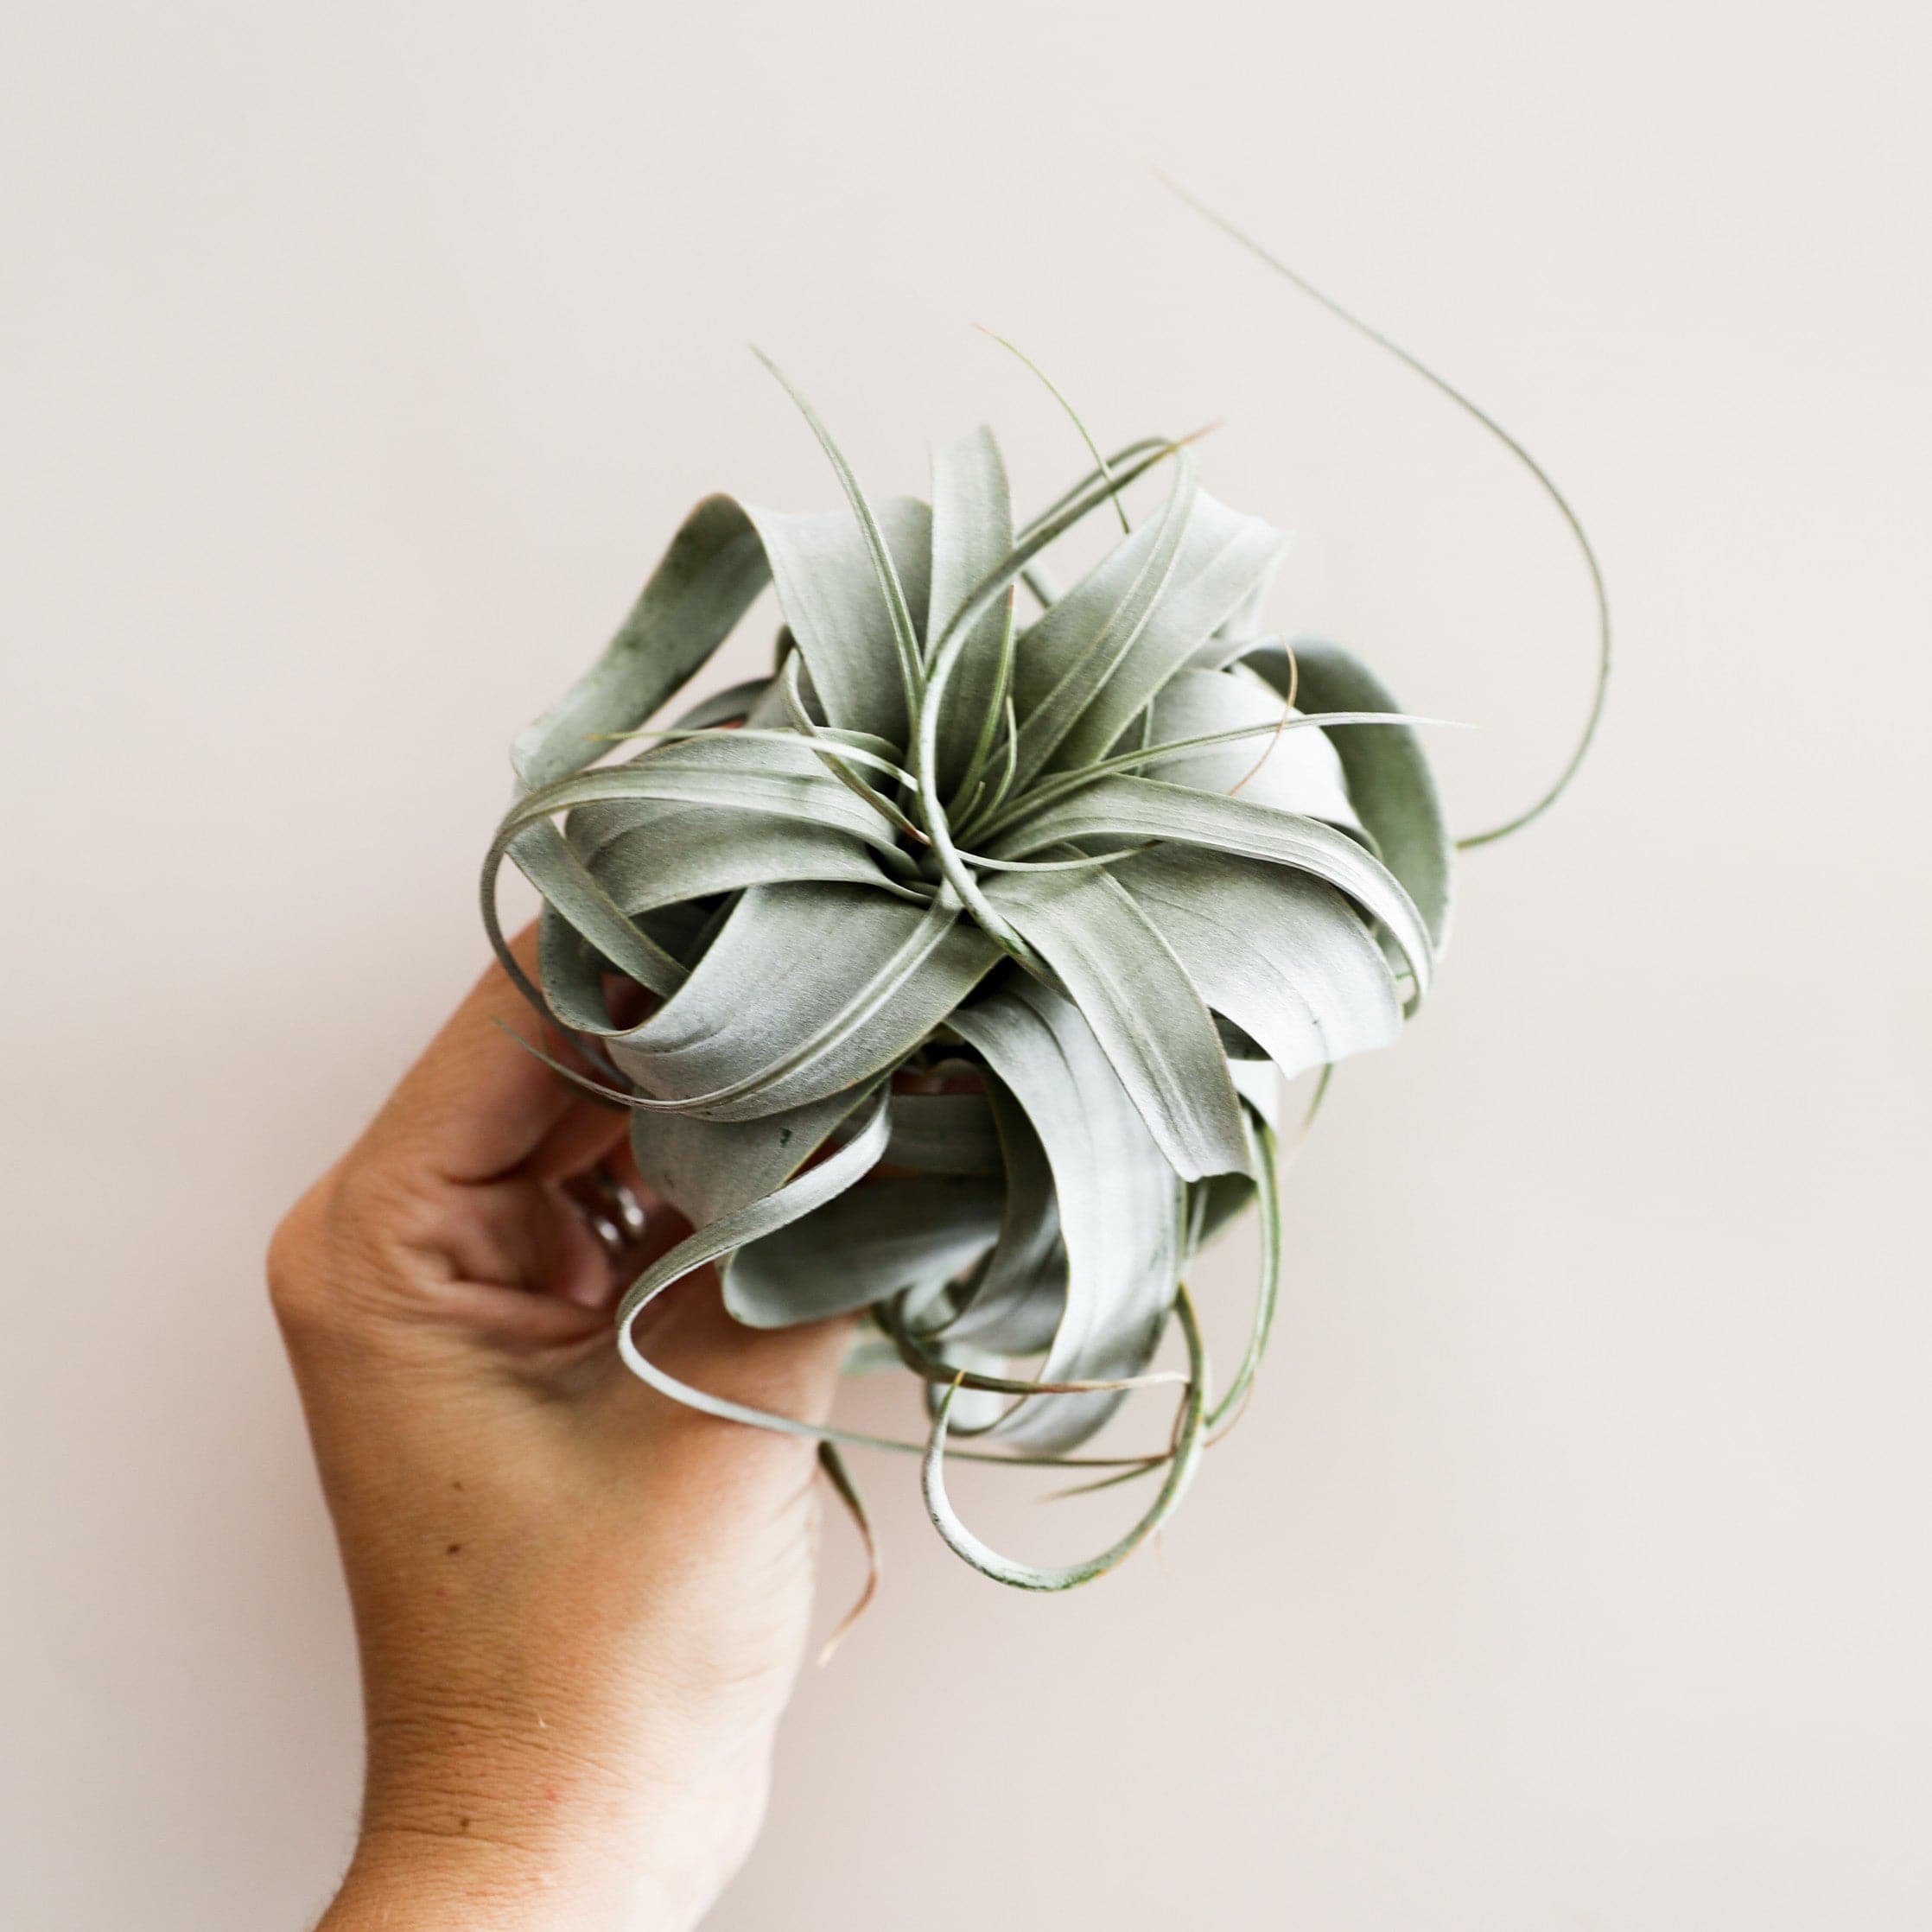 This plant has pale green and slender triangle leaves that grow in a rosette pattern with new growth coming from the center of the plant. Plant is held in a hand. 